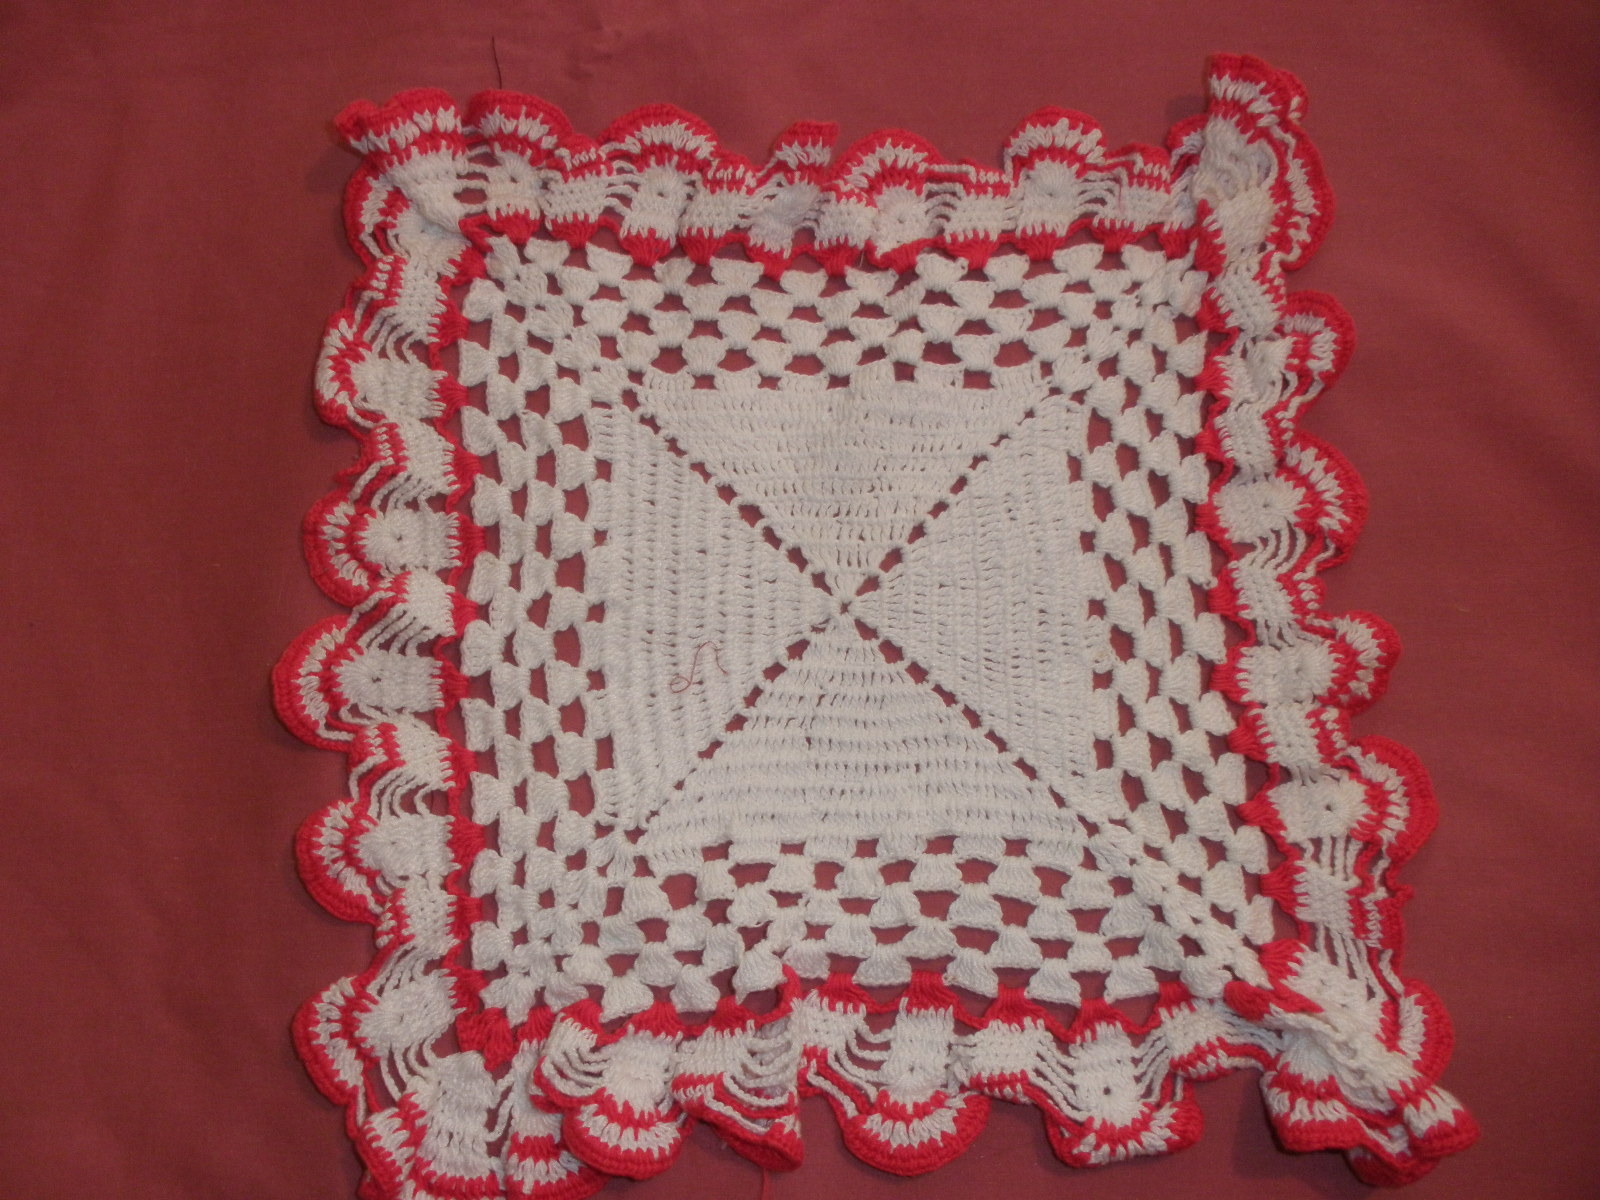 Square crochet doily vintage with red edging on white - $11.50